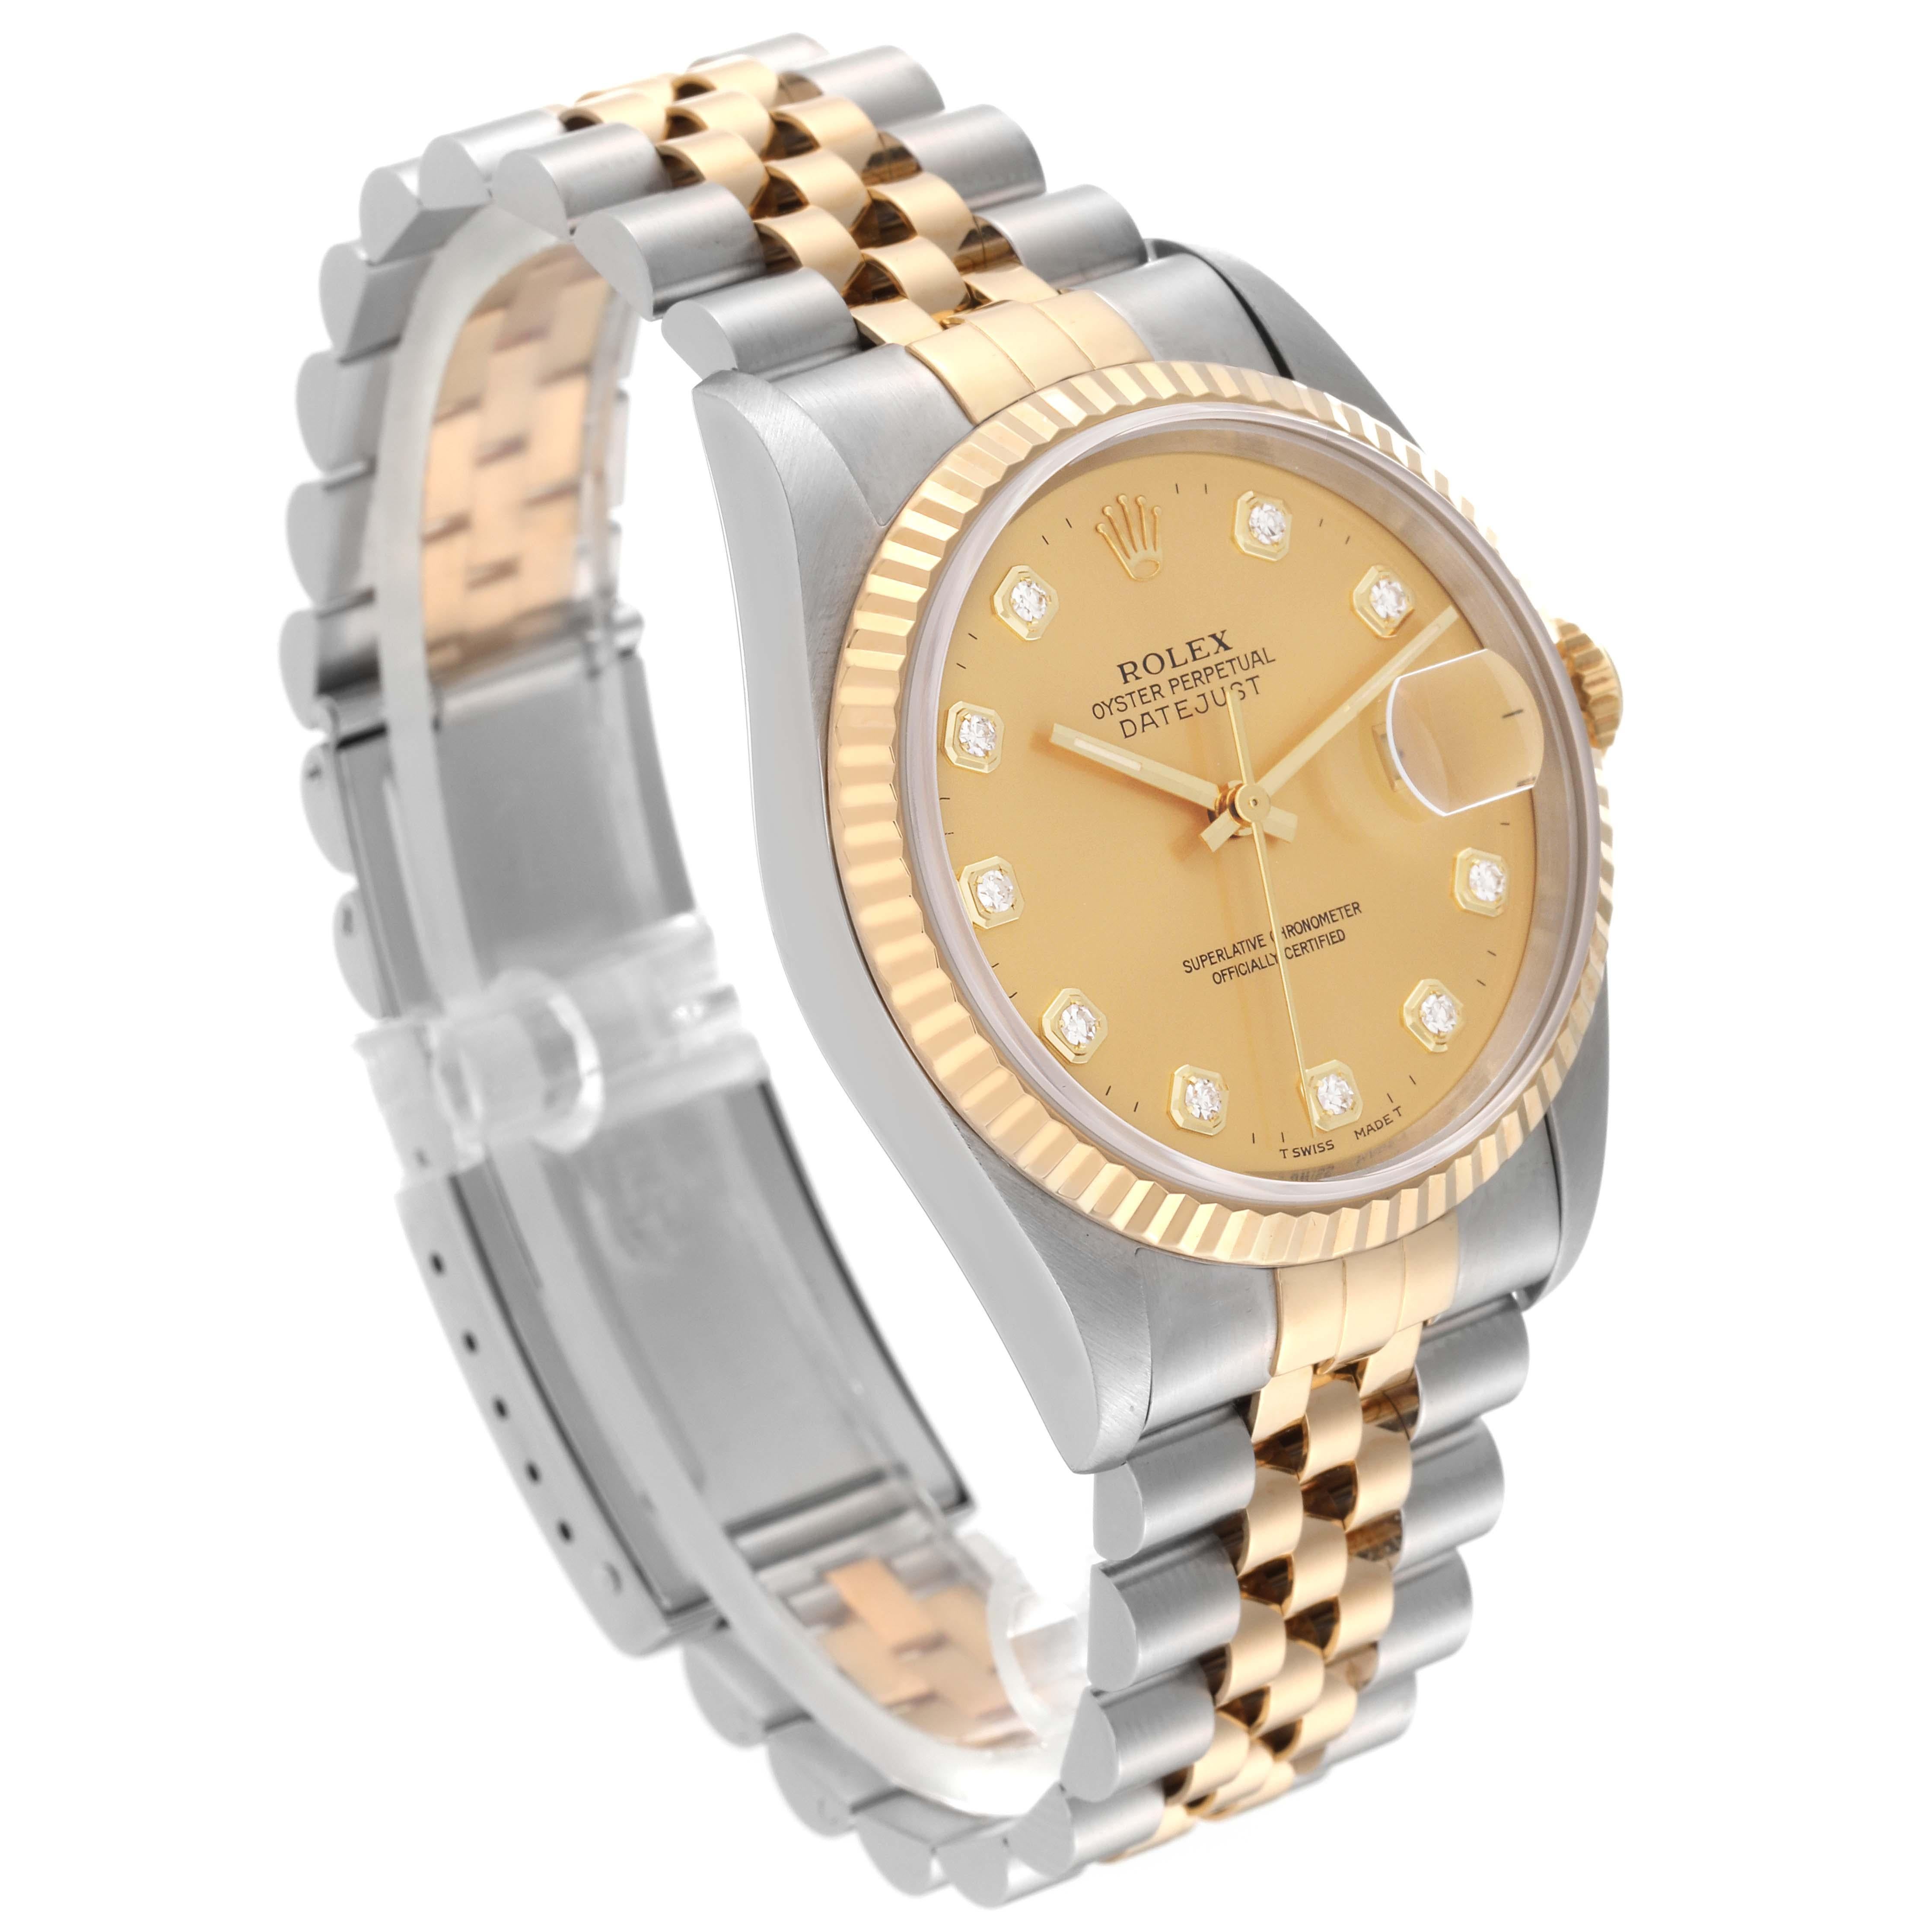 Men's Rolex Datejust Diamond Dial Steel Yellow Gold Mens Watch 16233 Box Papers For Sale